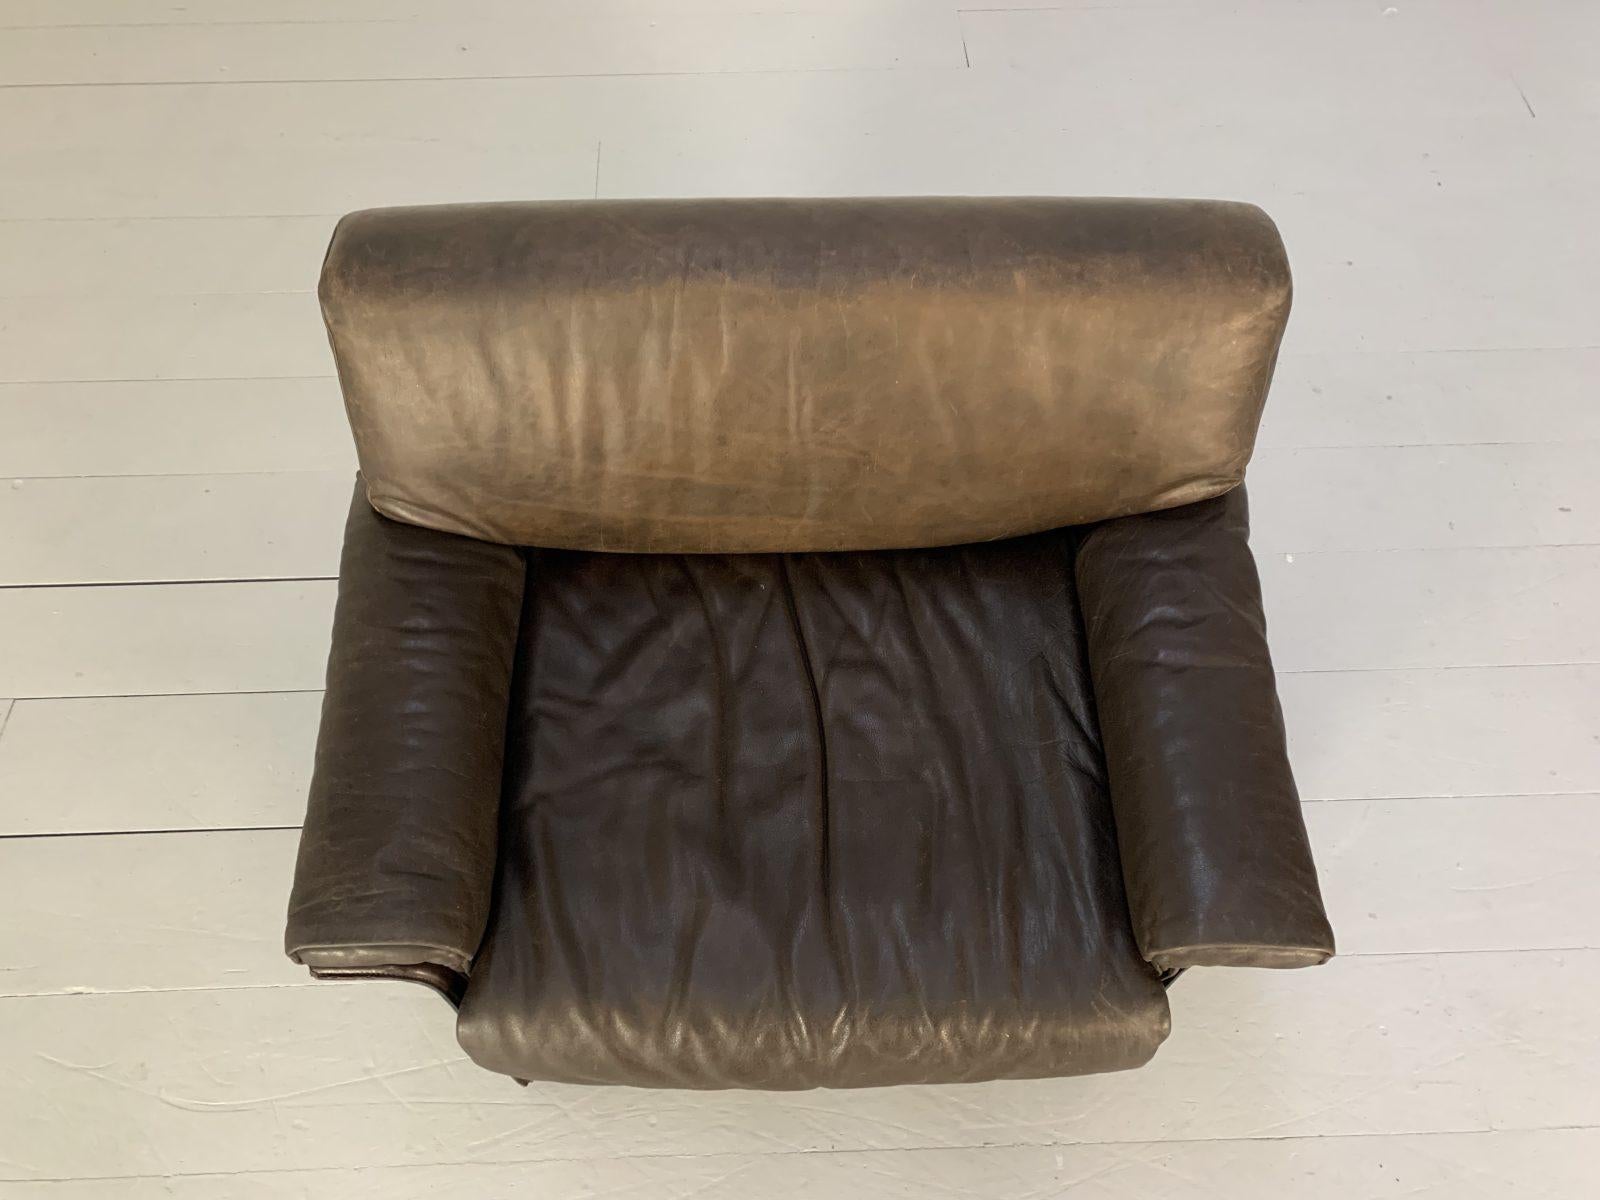 Pair of Matteo Grassi “Tm” Armchairs – in Vintage Brown Leather For Sale 7